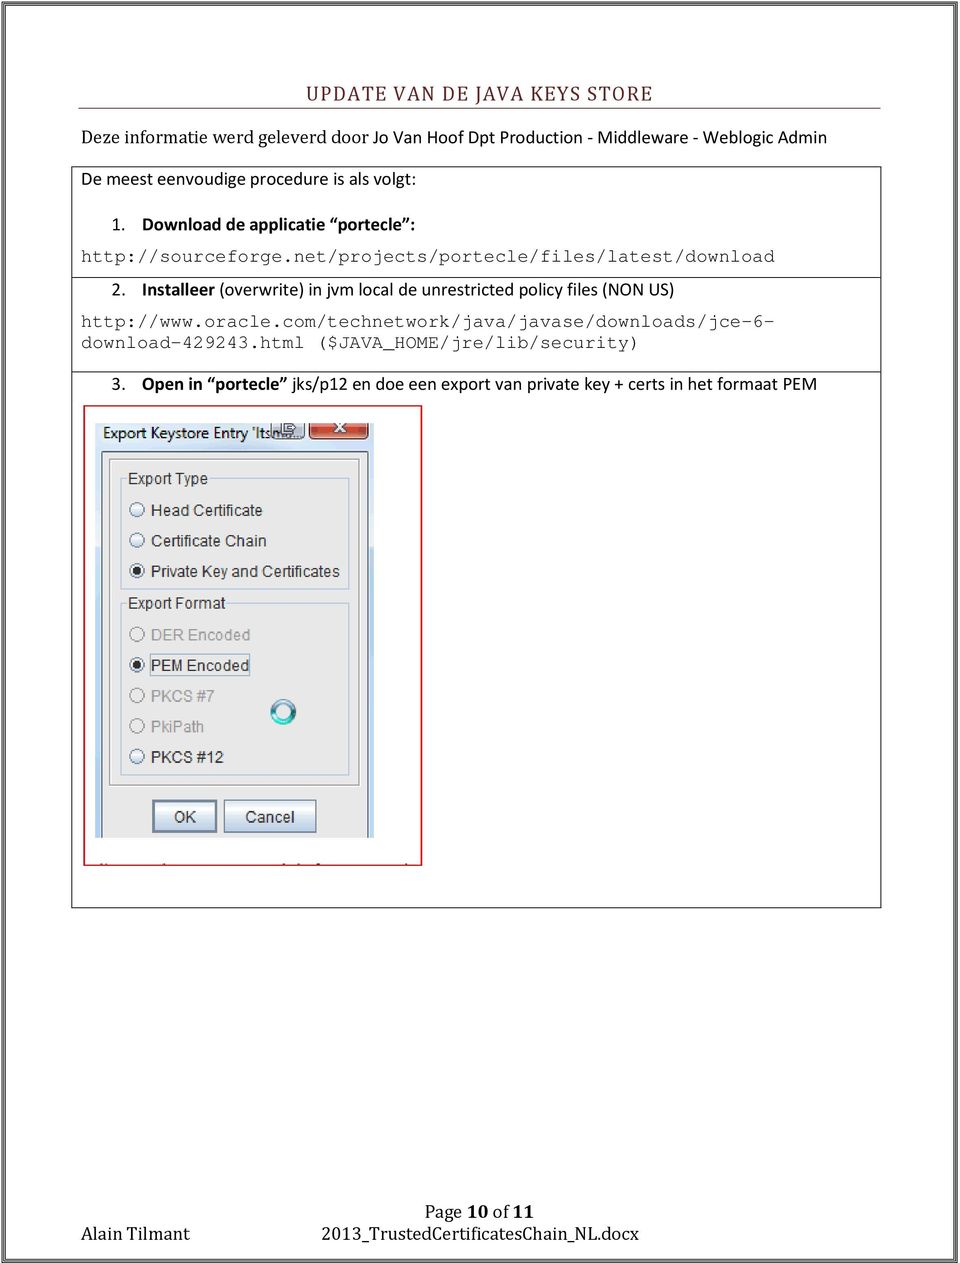 Installeer (overwrite) in jvm local de unrestricted policy files (NON US) http://www.oracle.